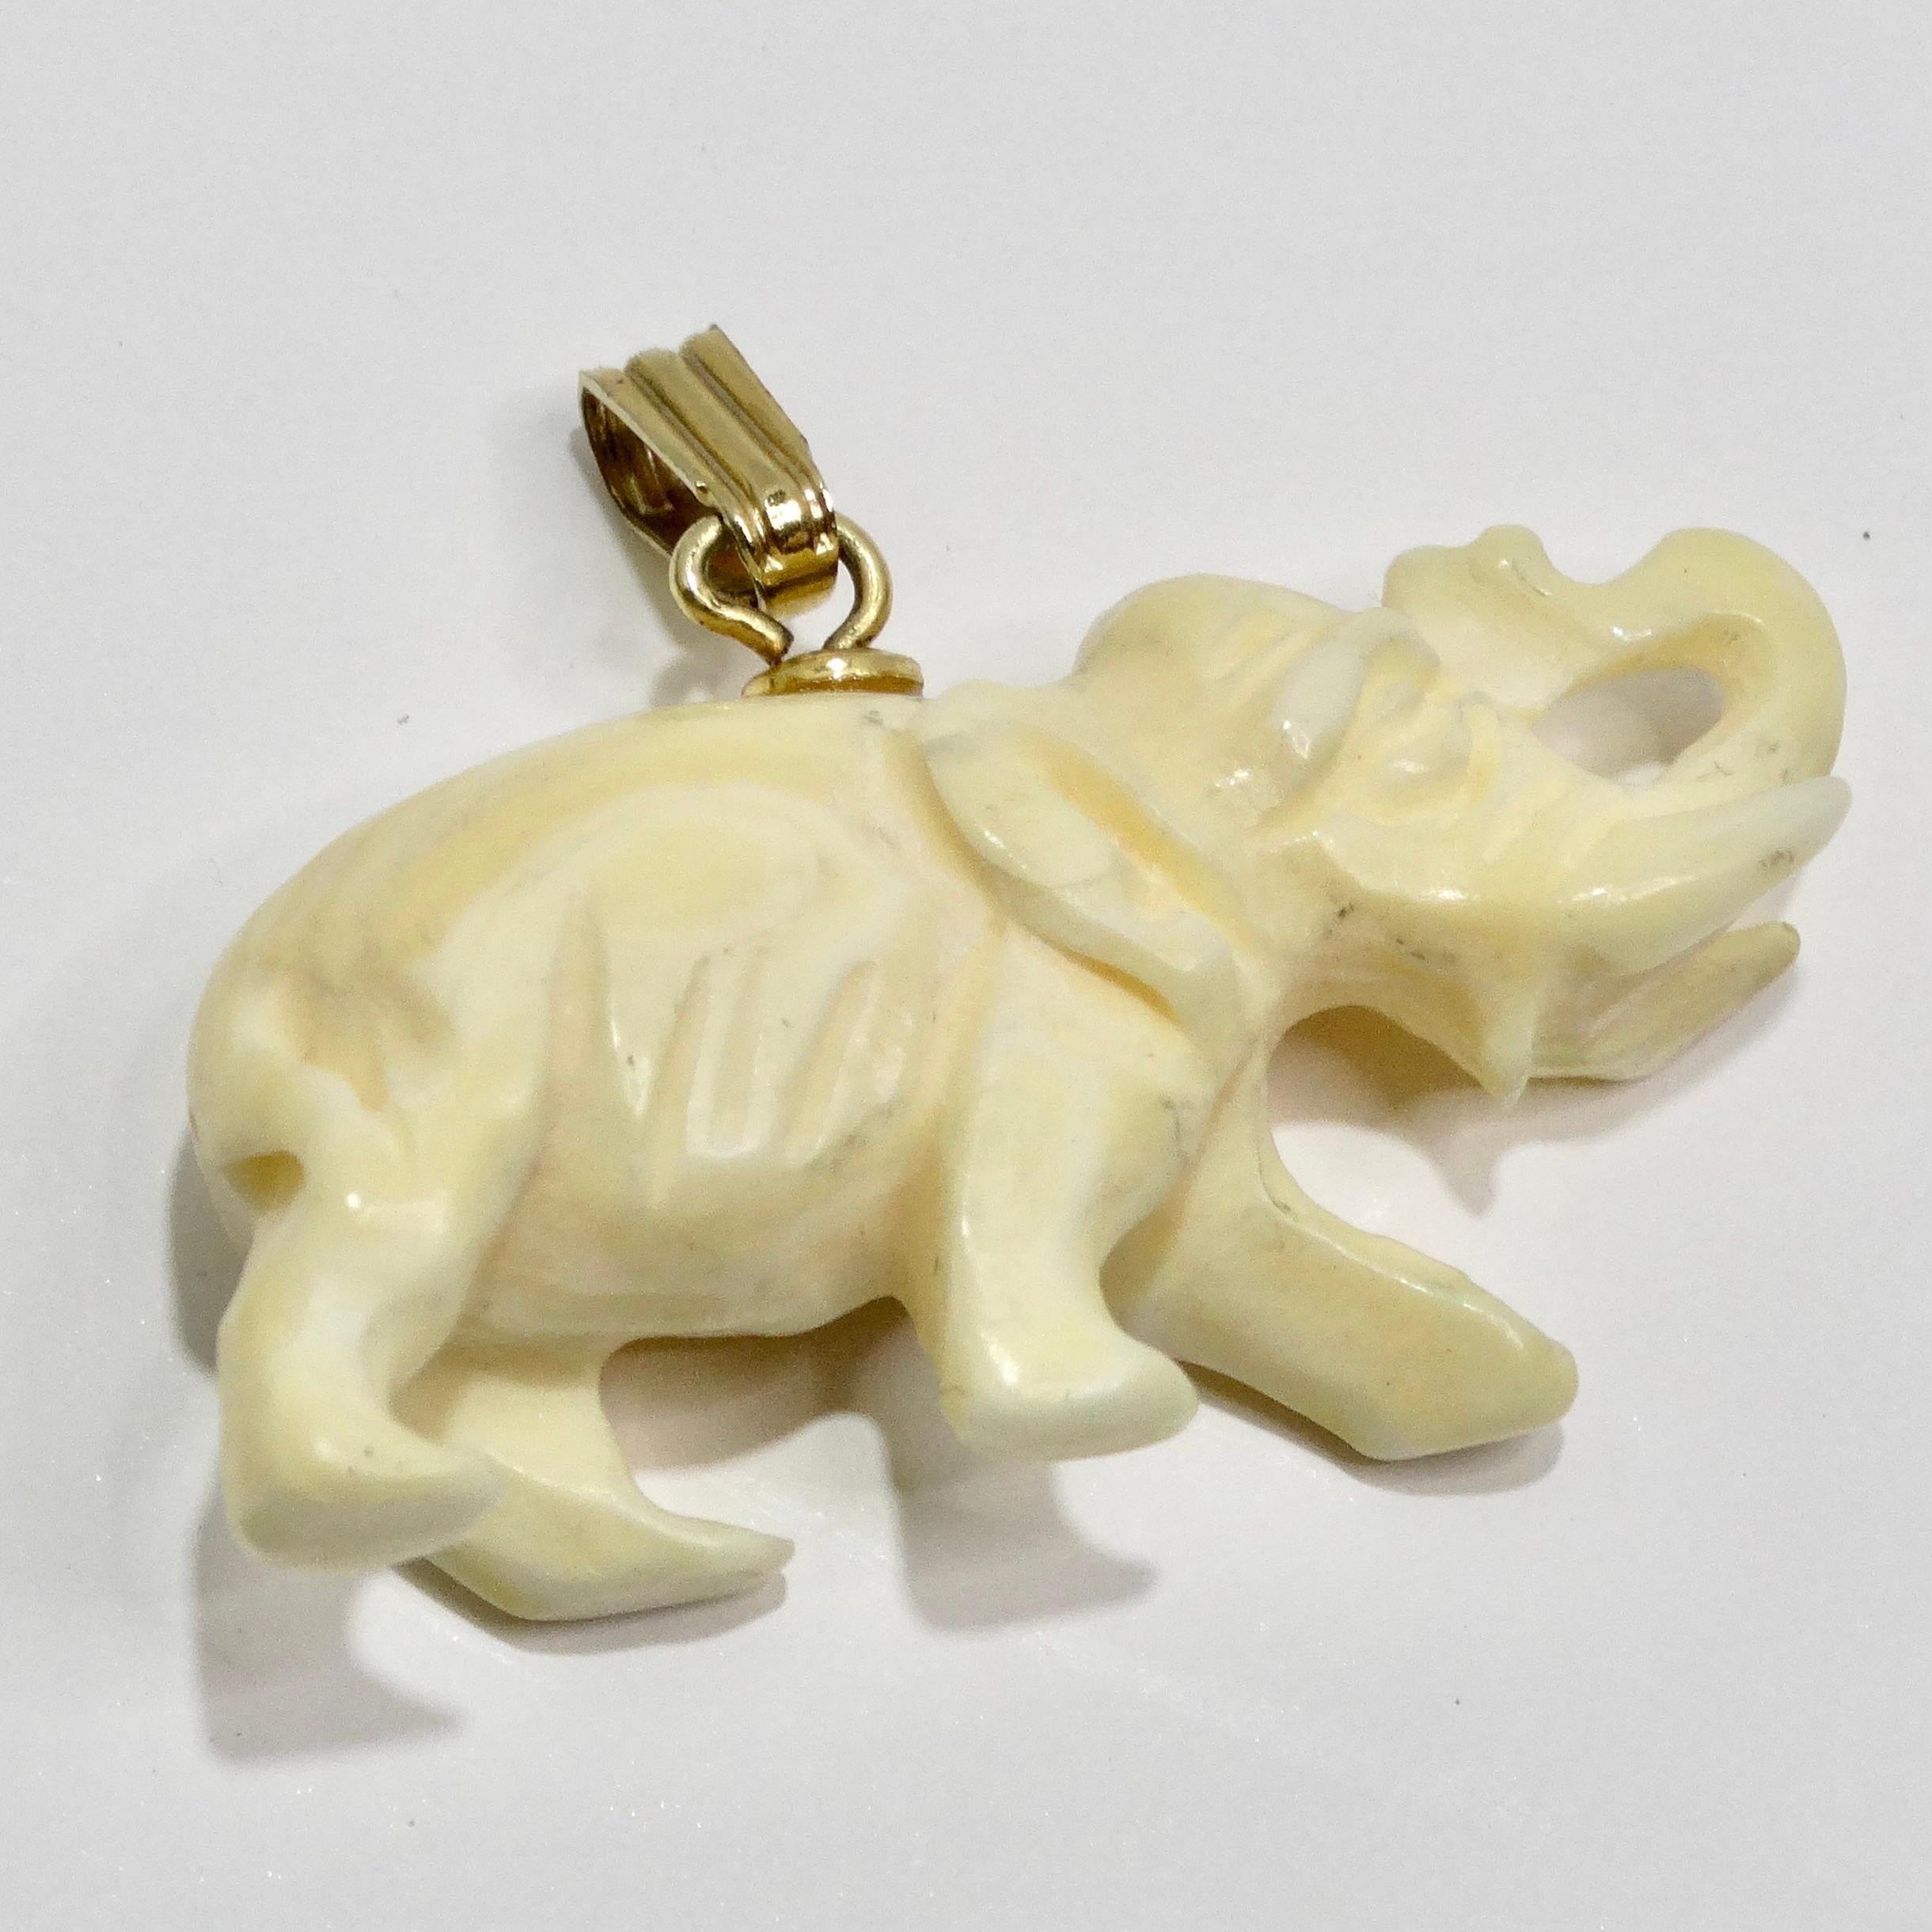 Introducing the 1960s Ivory Elephant Pendant, a vintage piece that combines delicate charm with subtle uniqueness. This beautiful pendant features an intricately carved elephant, symbolizing strength, wisdom, and good fortune. Crafted in luxurious